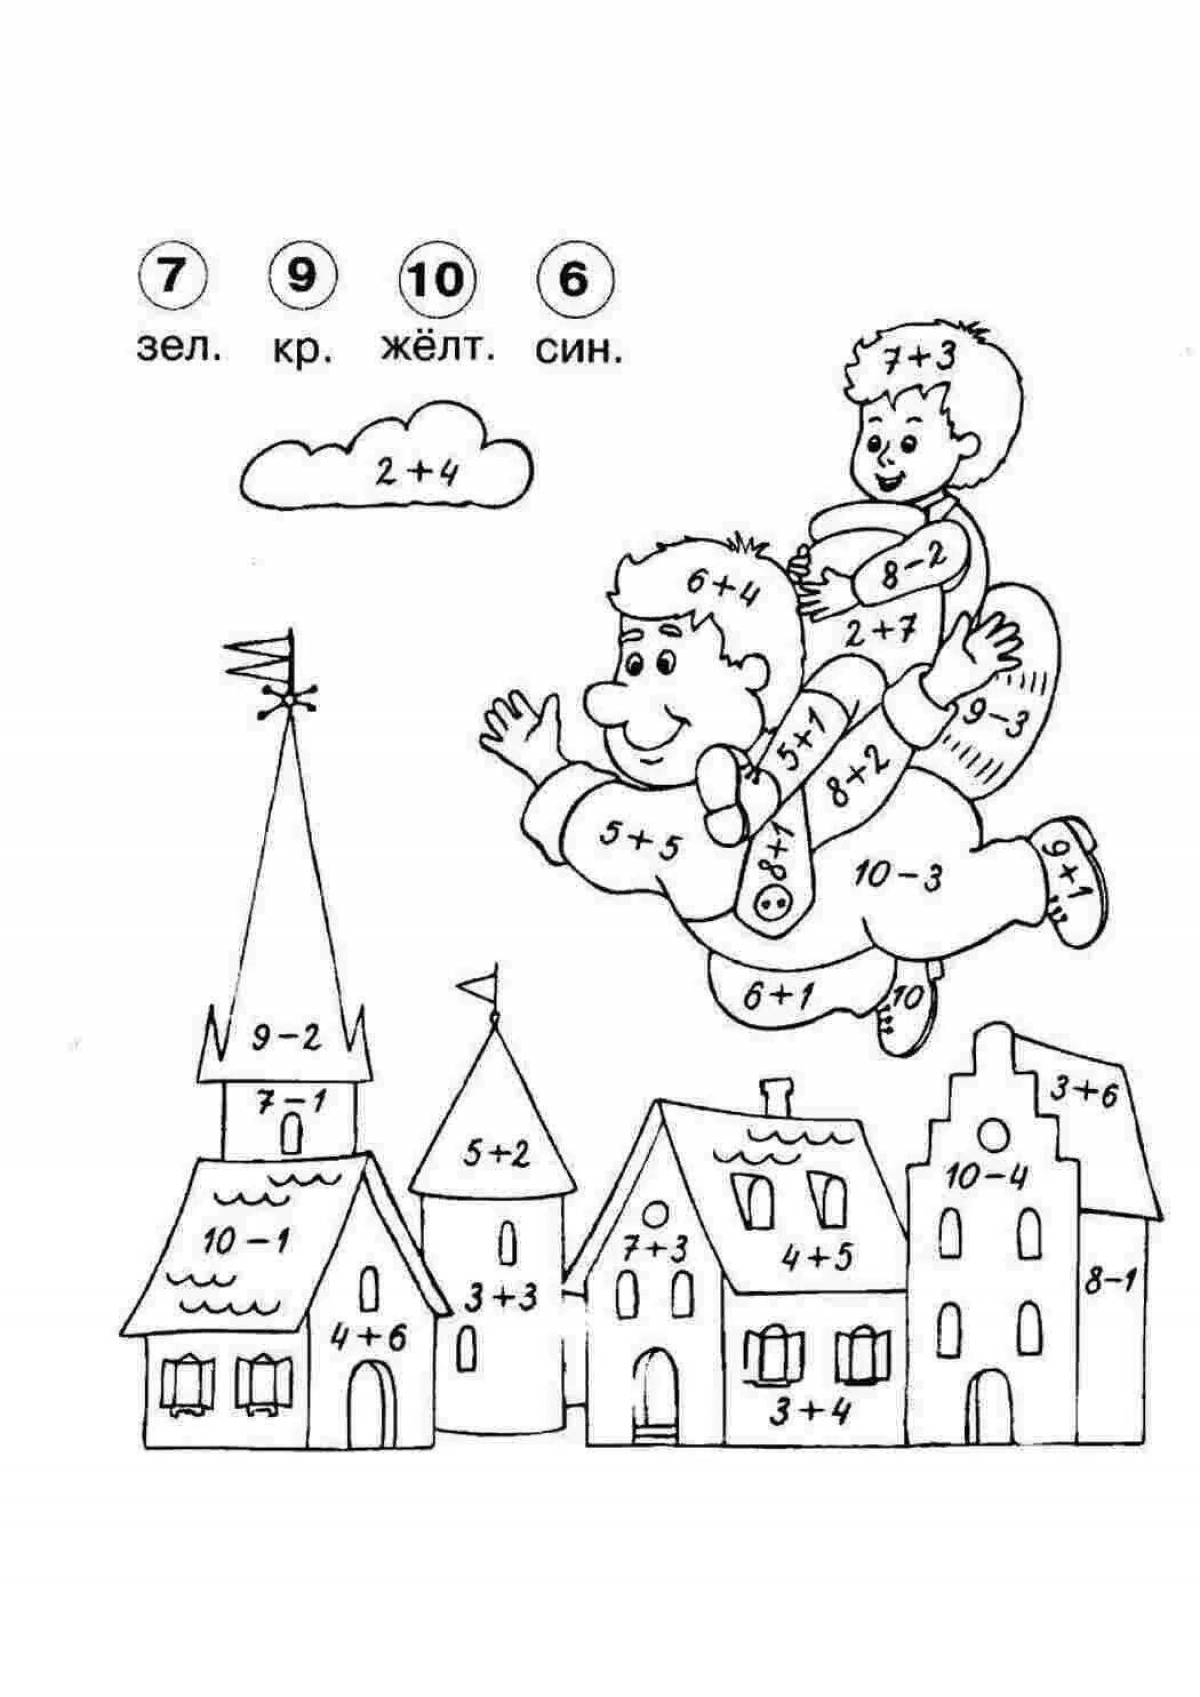 Fun math coloring book with examples for preschoolers